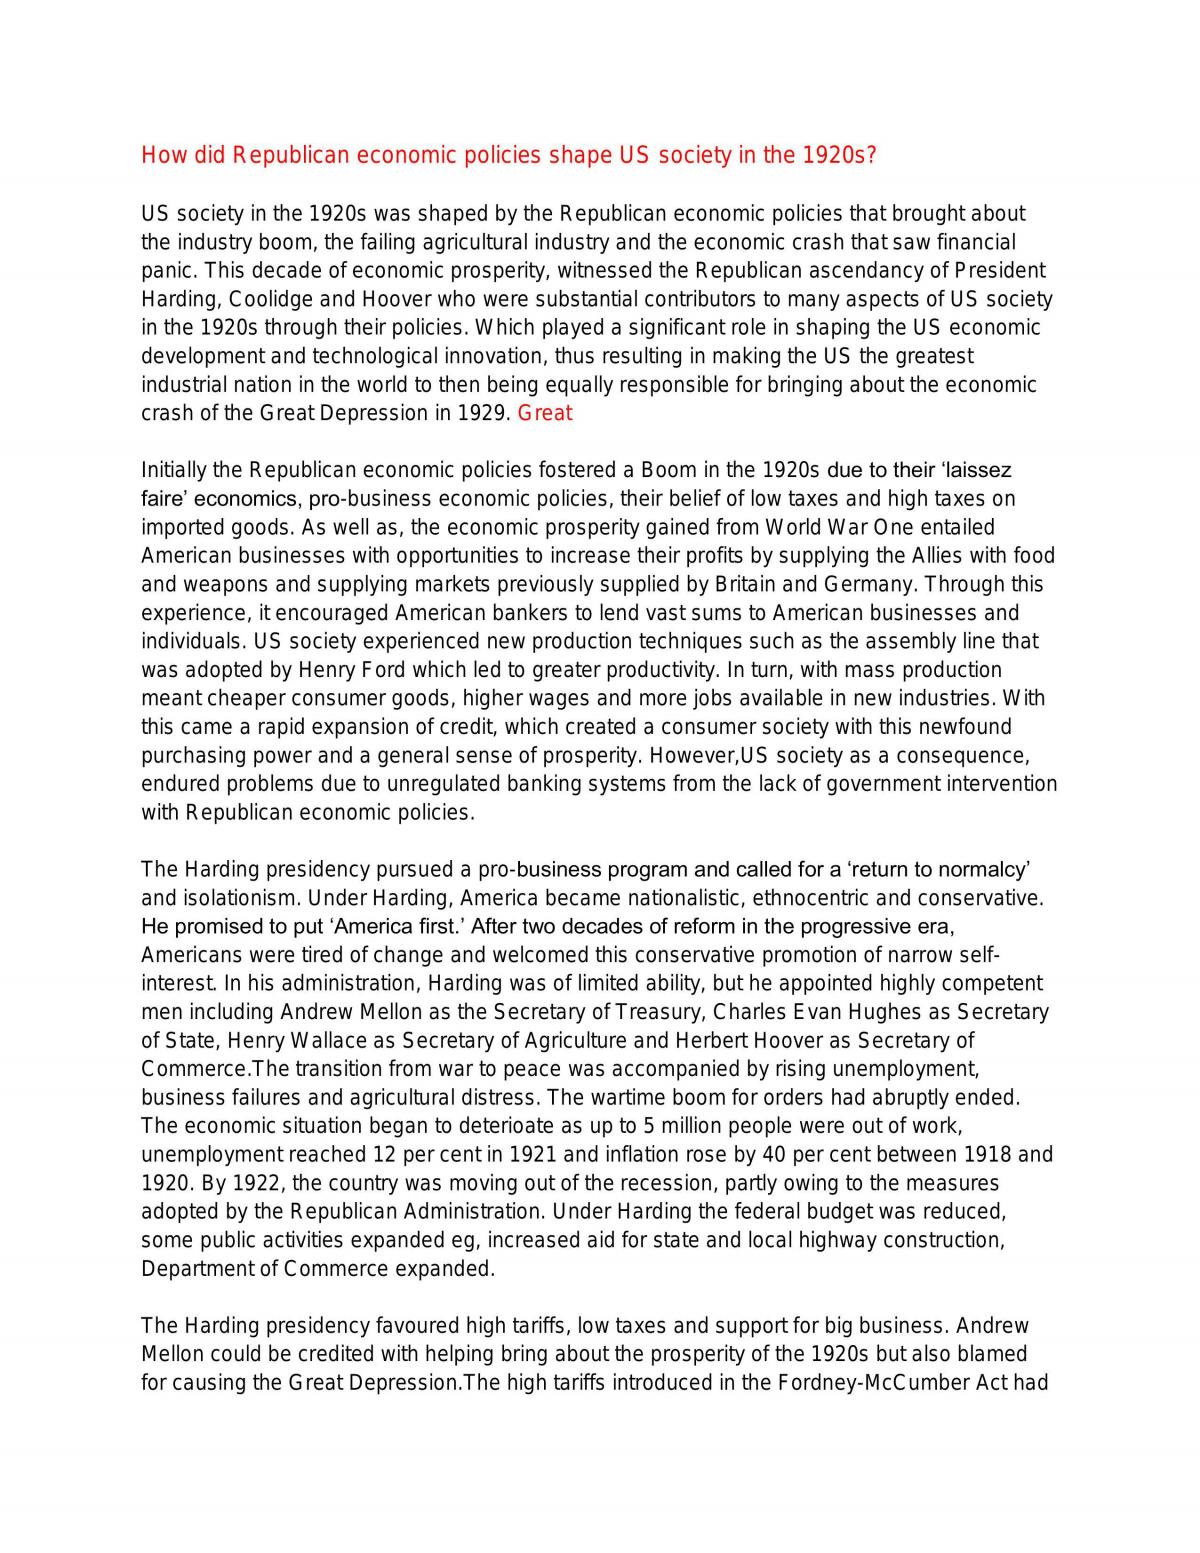 Republican Economic Policies Essay - USA Society - Modern History HSC - Page 1